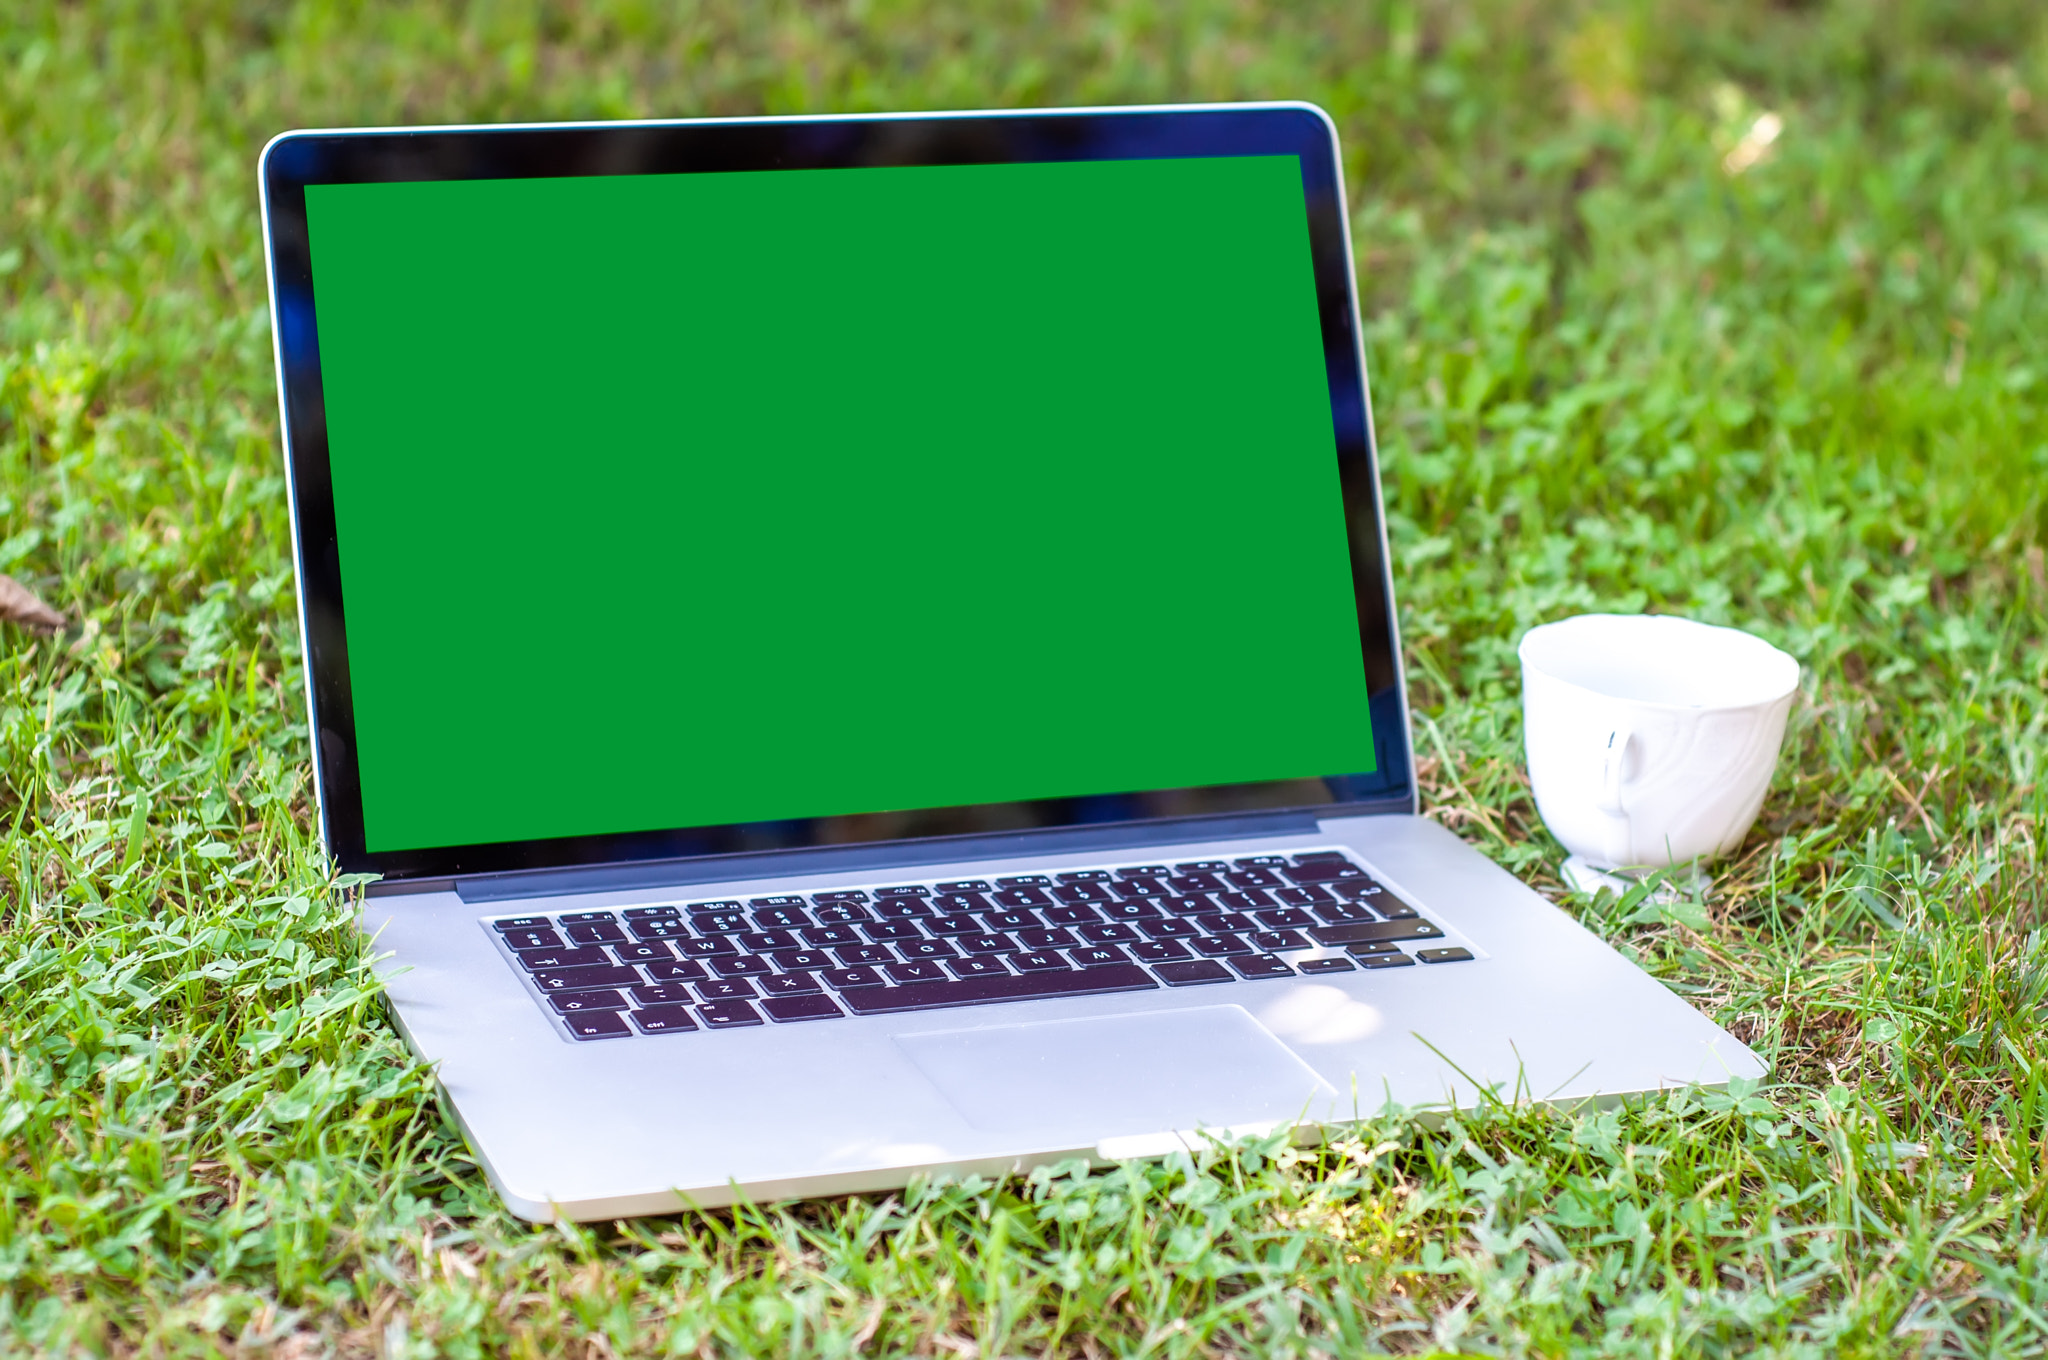 View on a laptop pc with a green screen and a mug on the grass